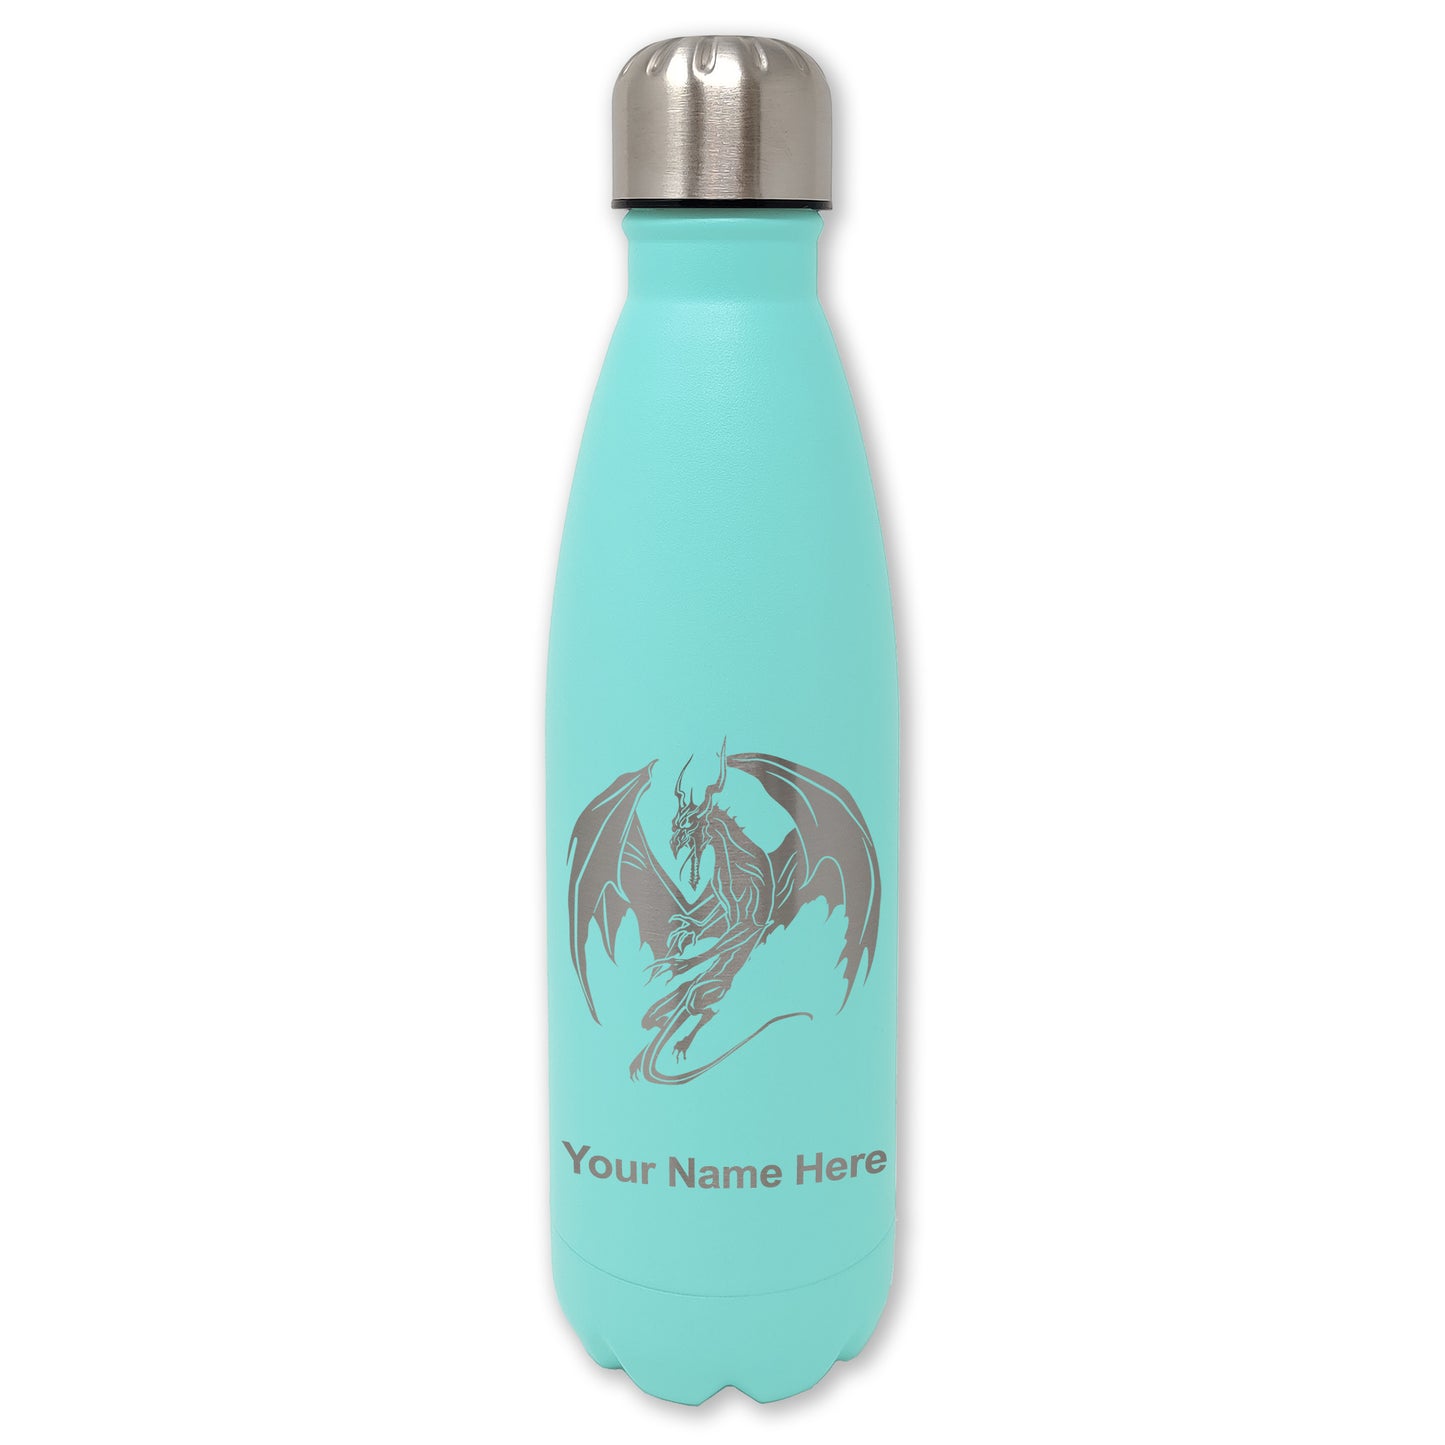 LaserGram Double Wall Water Bottle, Dragon, Personalized Engraving Included